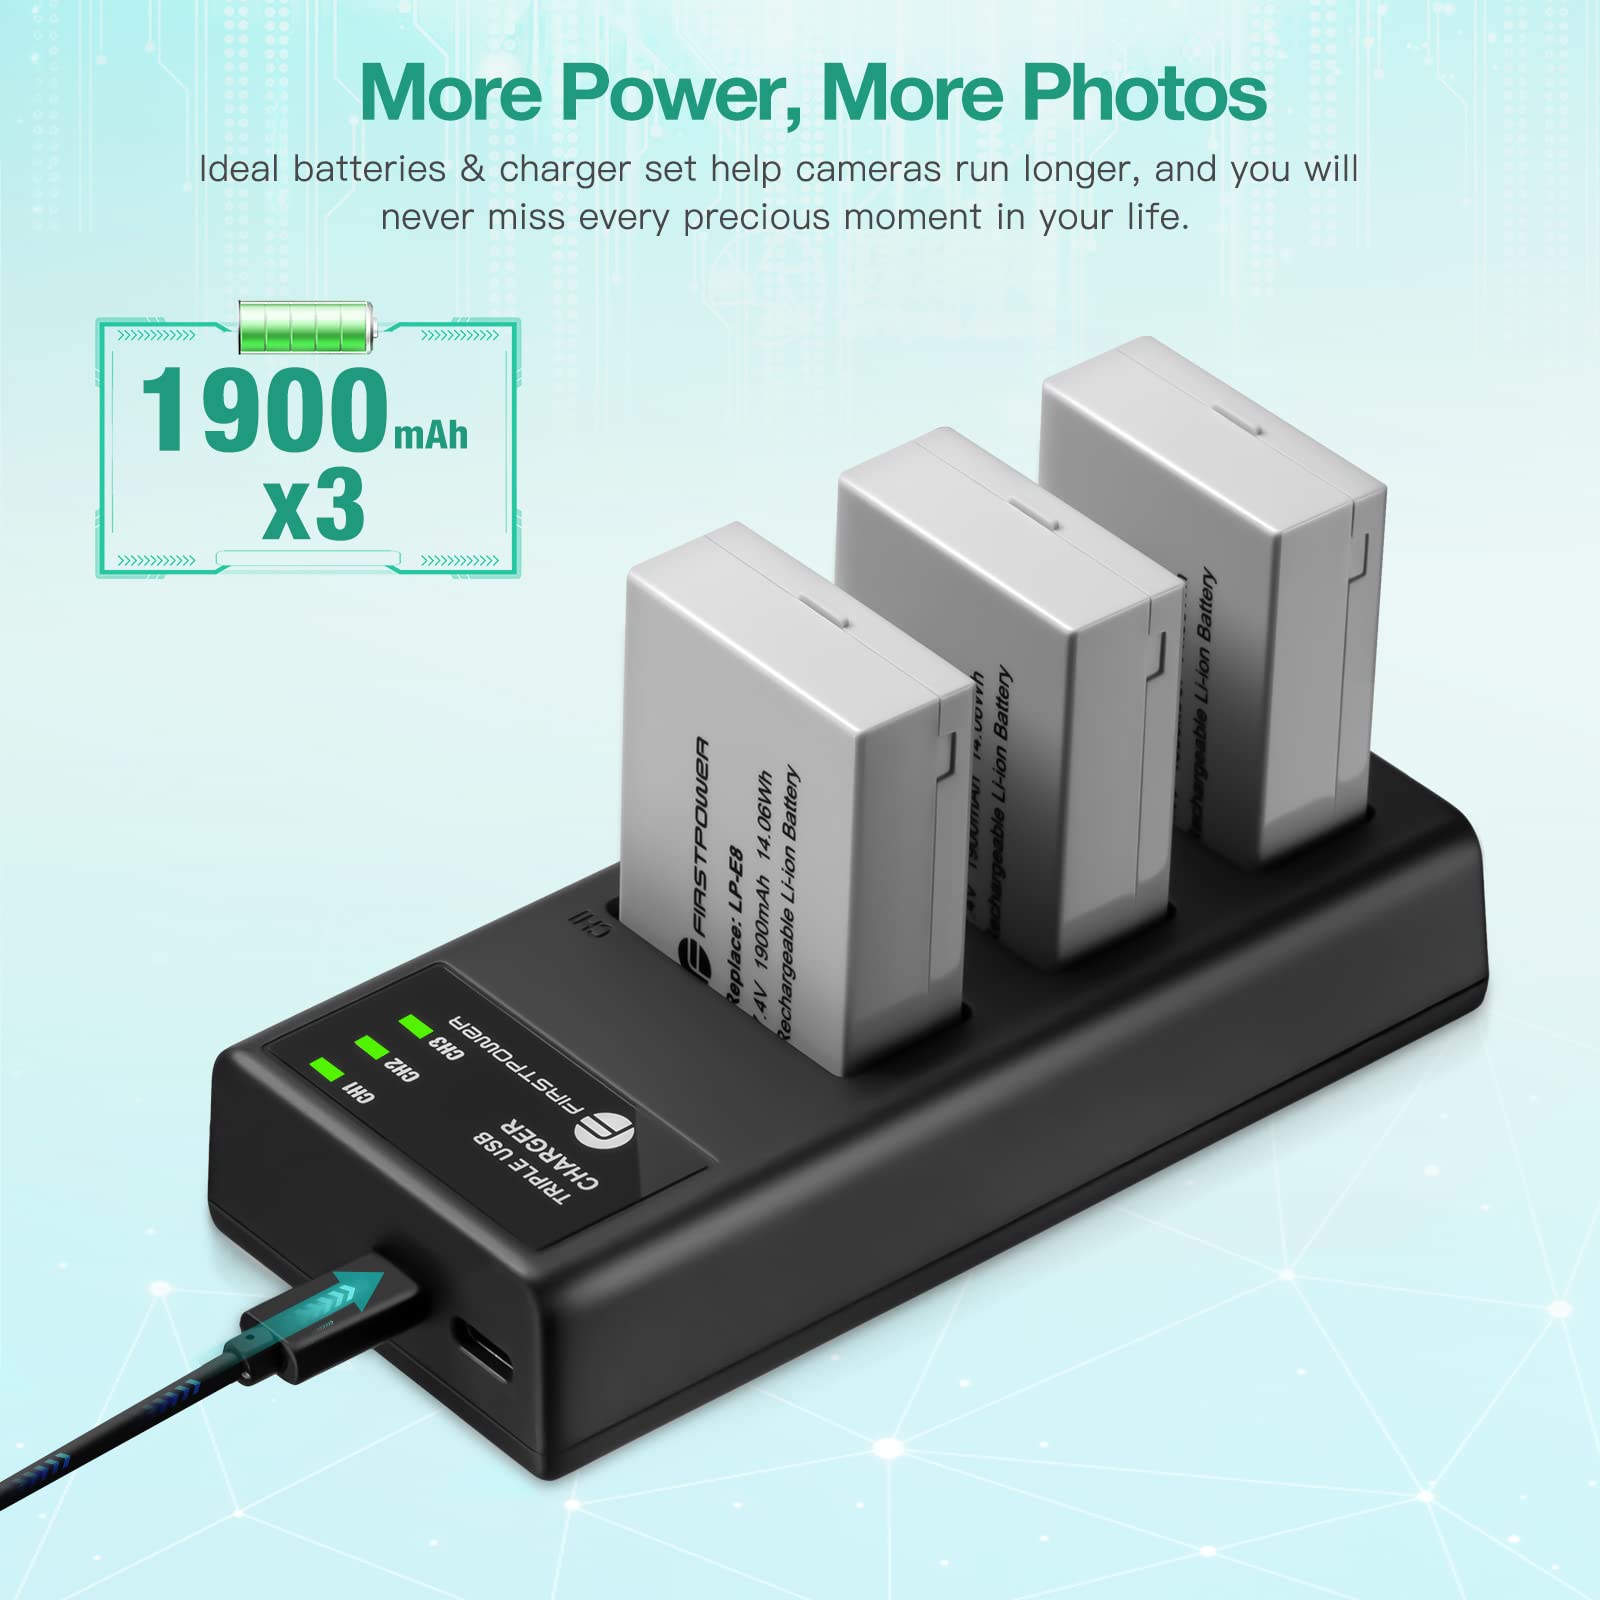 FirstPower LP-E8 Battery 3-Pack and Triple Slot Charger Compatible with Canon EOS Rebel T2i, T3i, T4i, T5i, 550D, 600D, 650D, 700D, Kiss X4, Kiss X5, Kiss X6 Digital Cameras